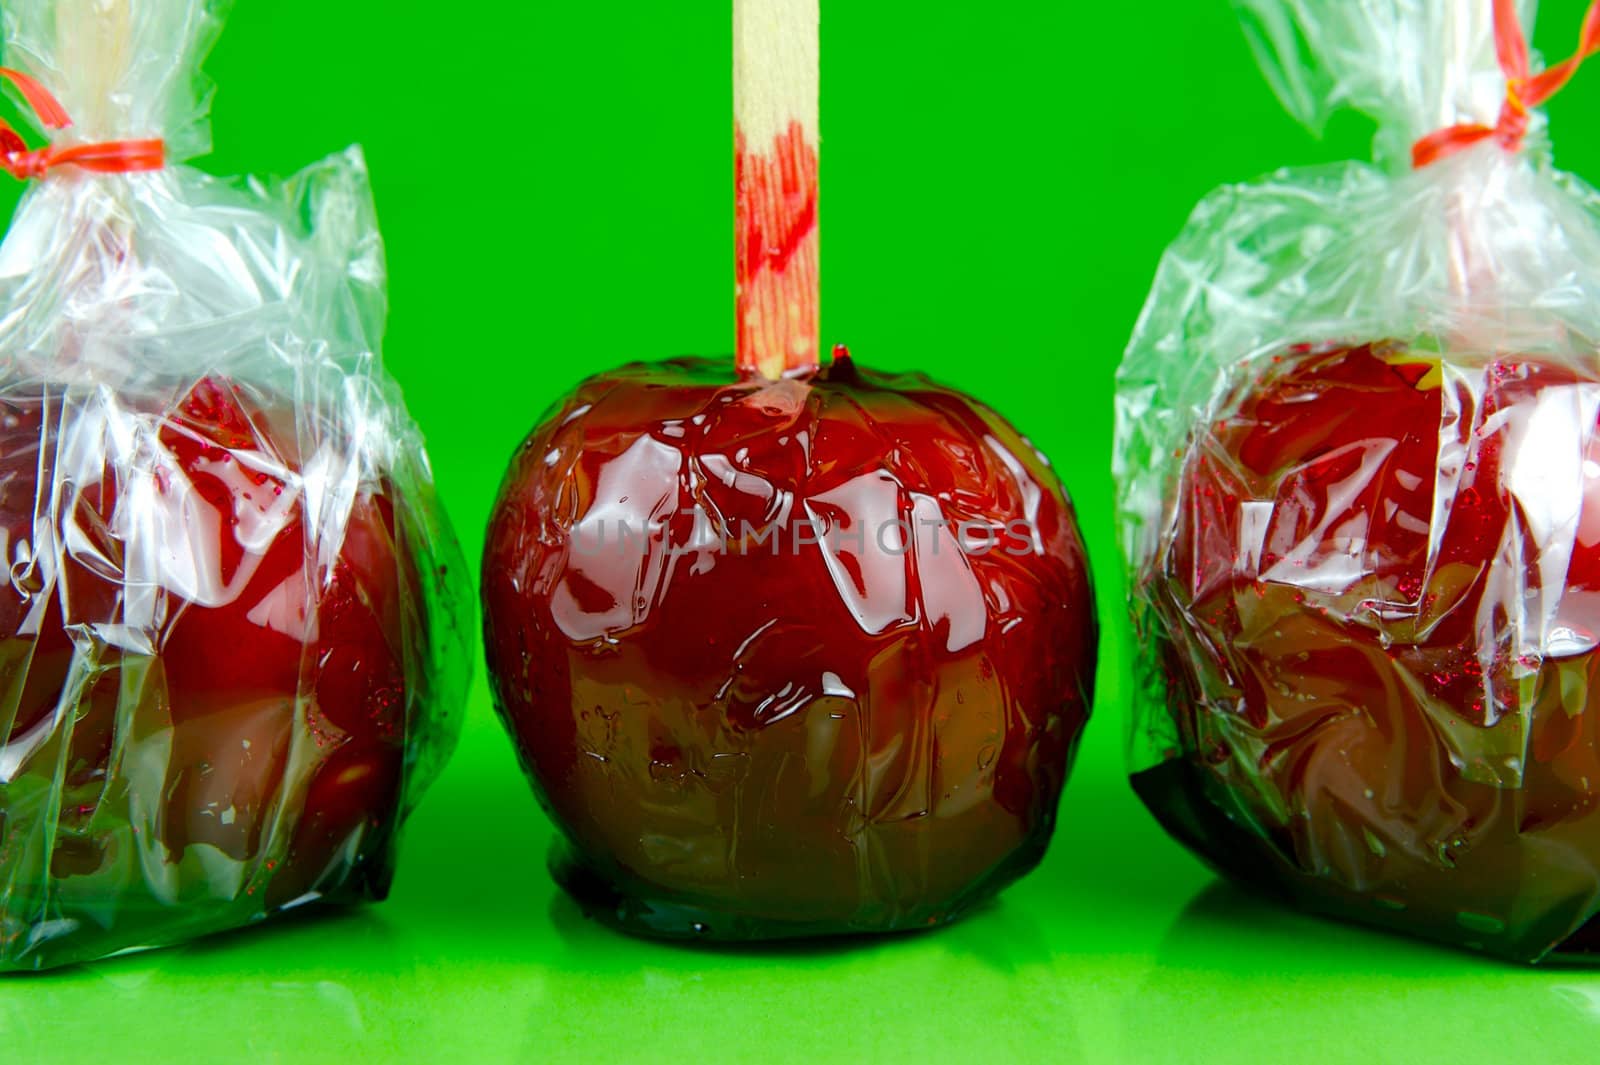 Candy apples isolated against a green background